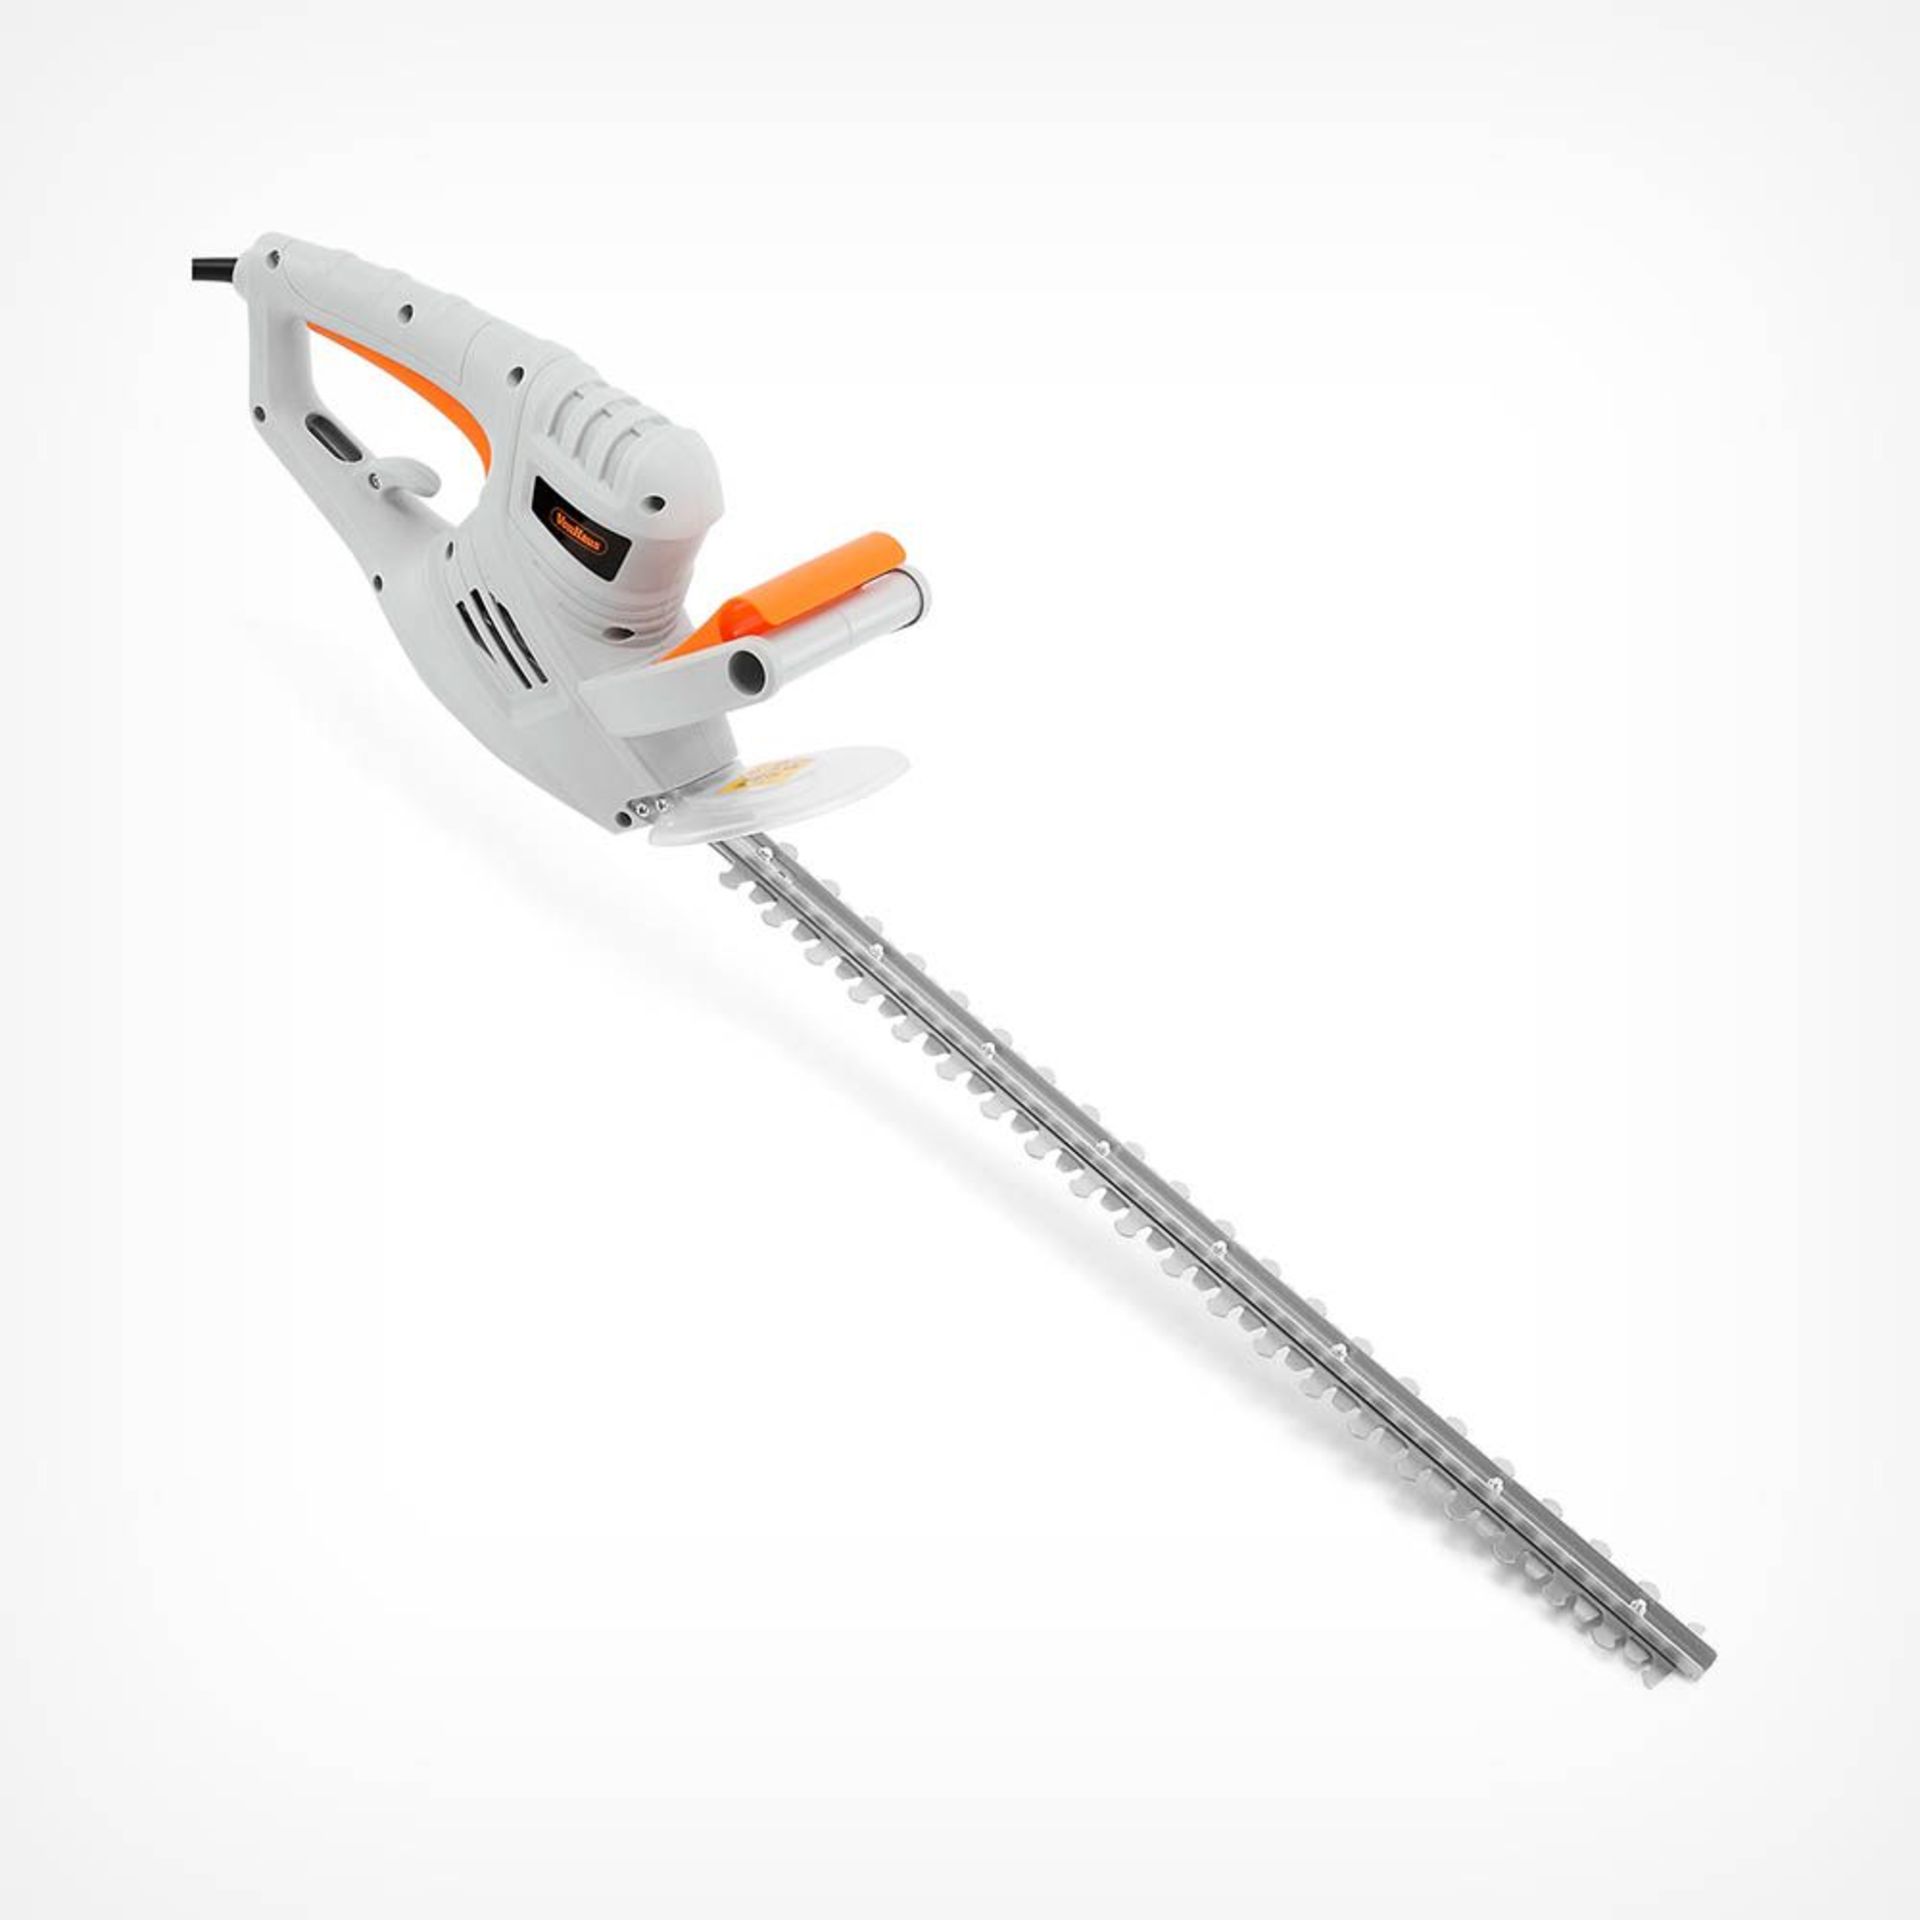 550W Hedge Trimmer. - P6. This trimmer is powered by a strong 500W motor, which is why it